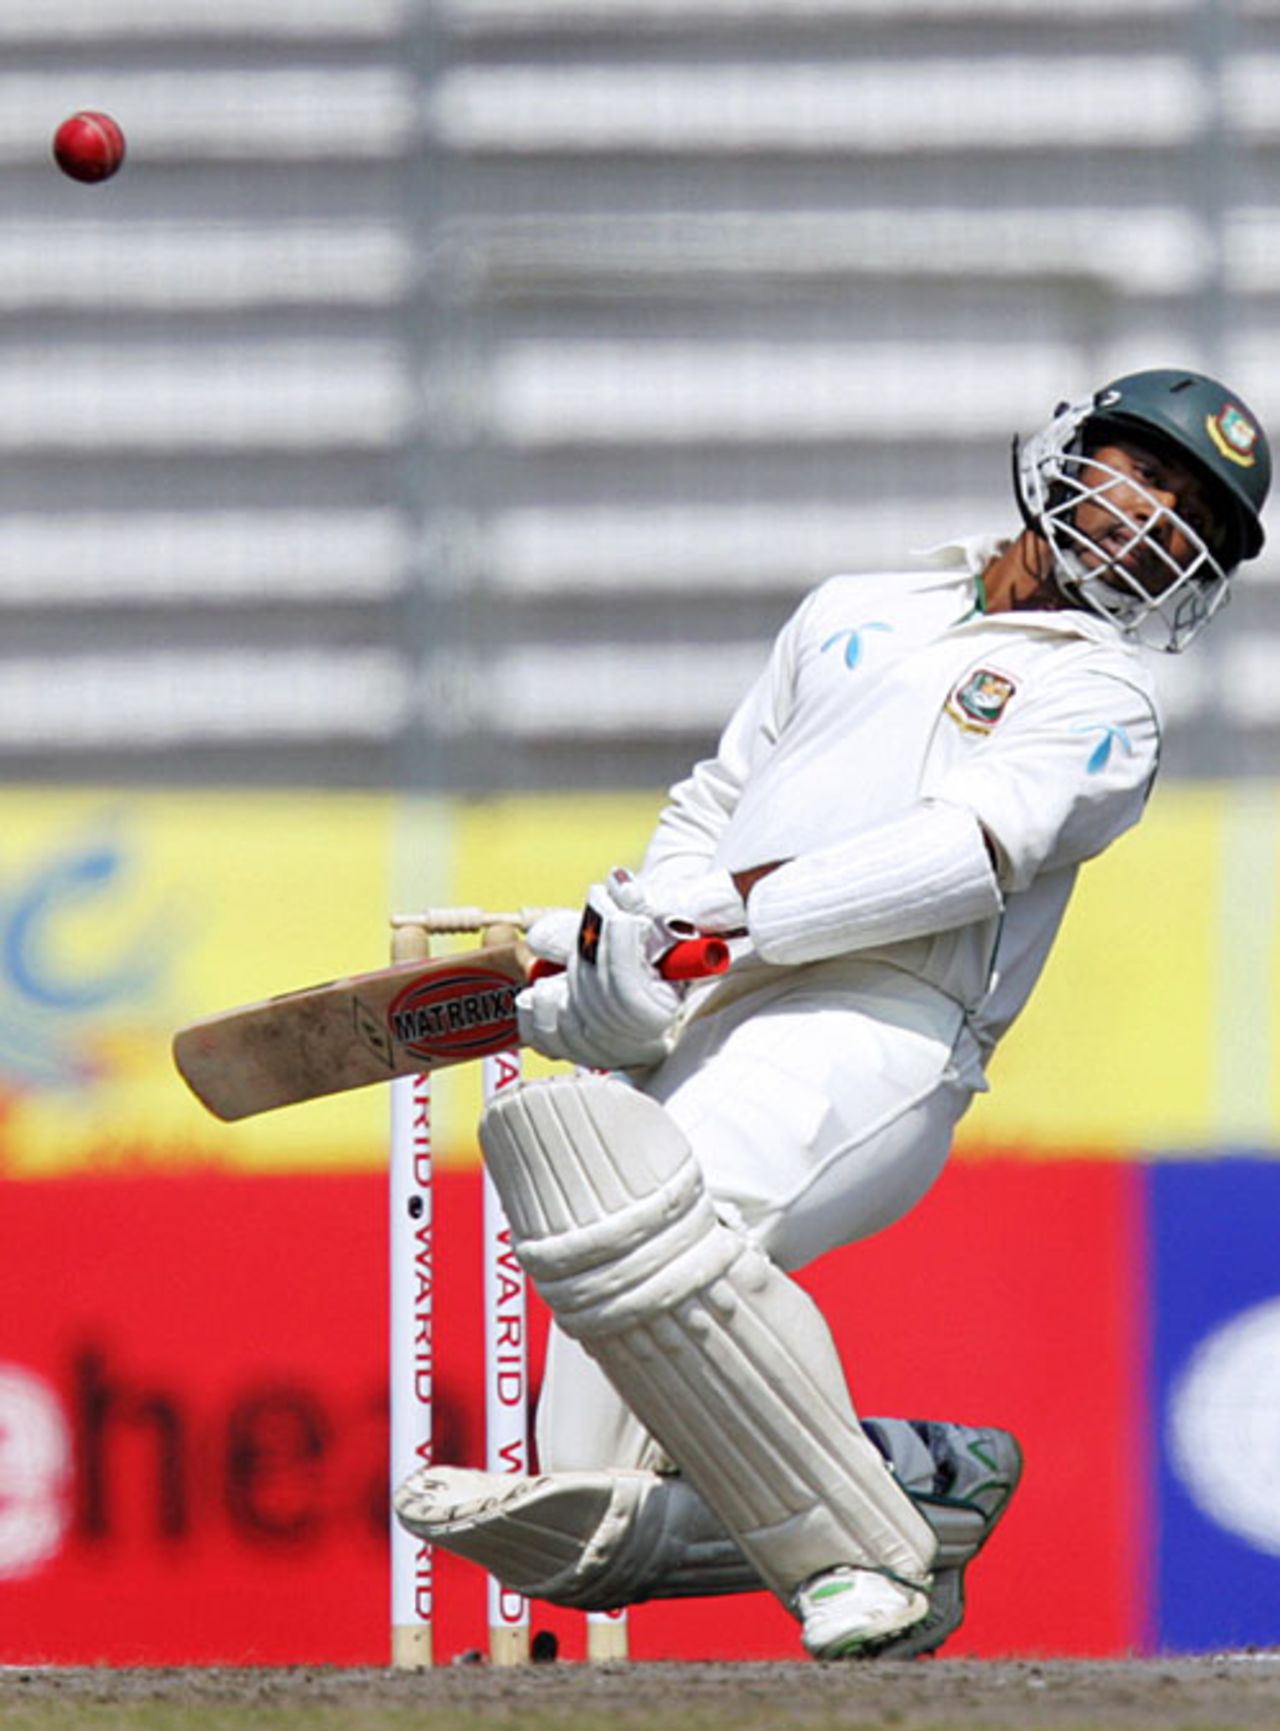 Aftab Ahmed ducks and swerves to avoid a bouncer, Bangladesh v South Africa, 1st Test, Mirpur, 1st day, February 22, 2008